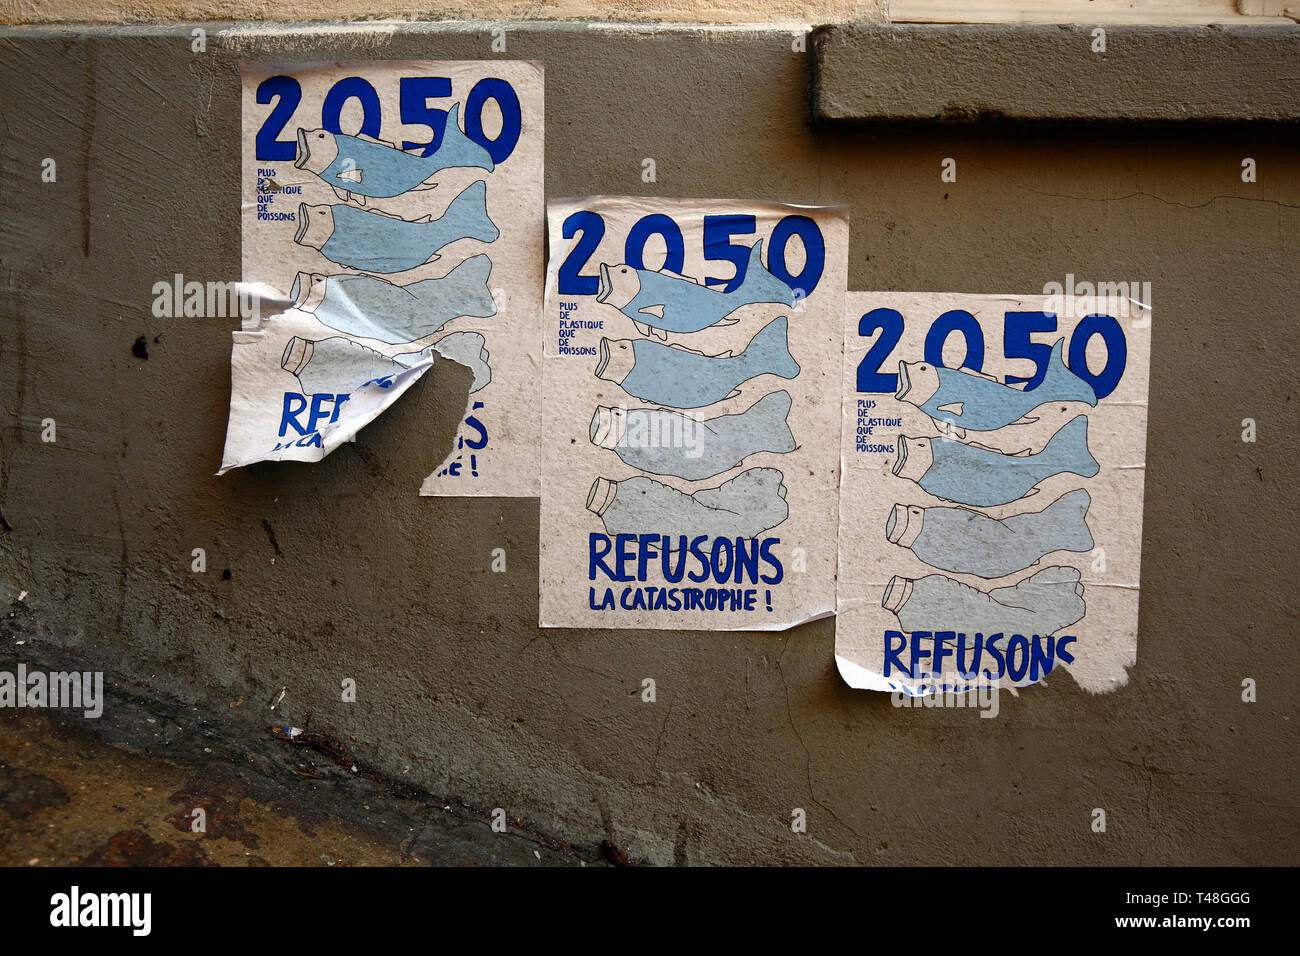 Flyers on a wall in Paris warning of an impending ocean plastic pollution crisis, Paris, France Stock Photo